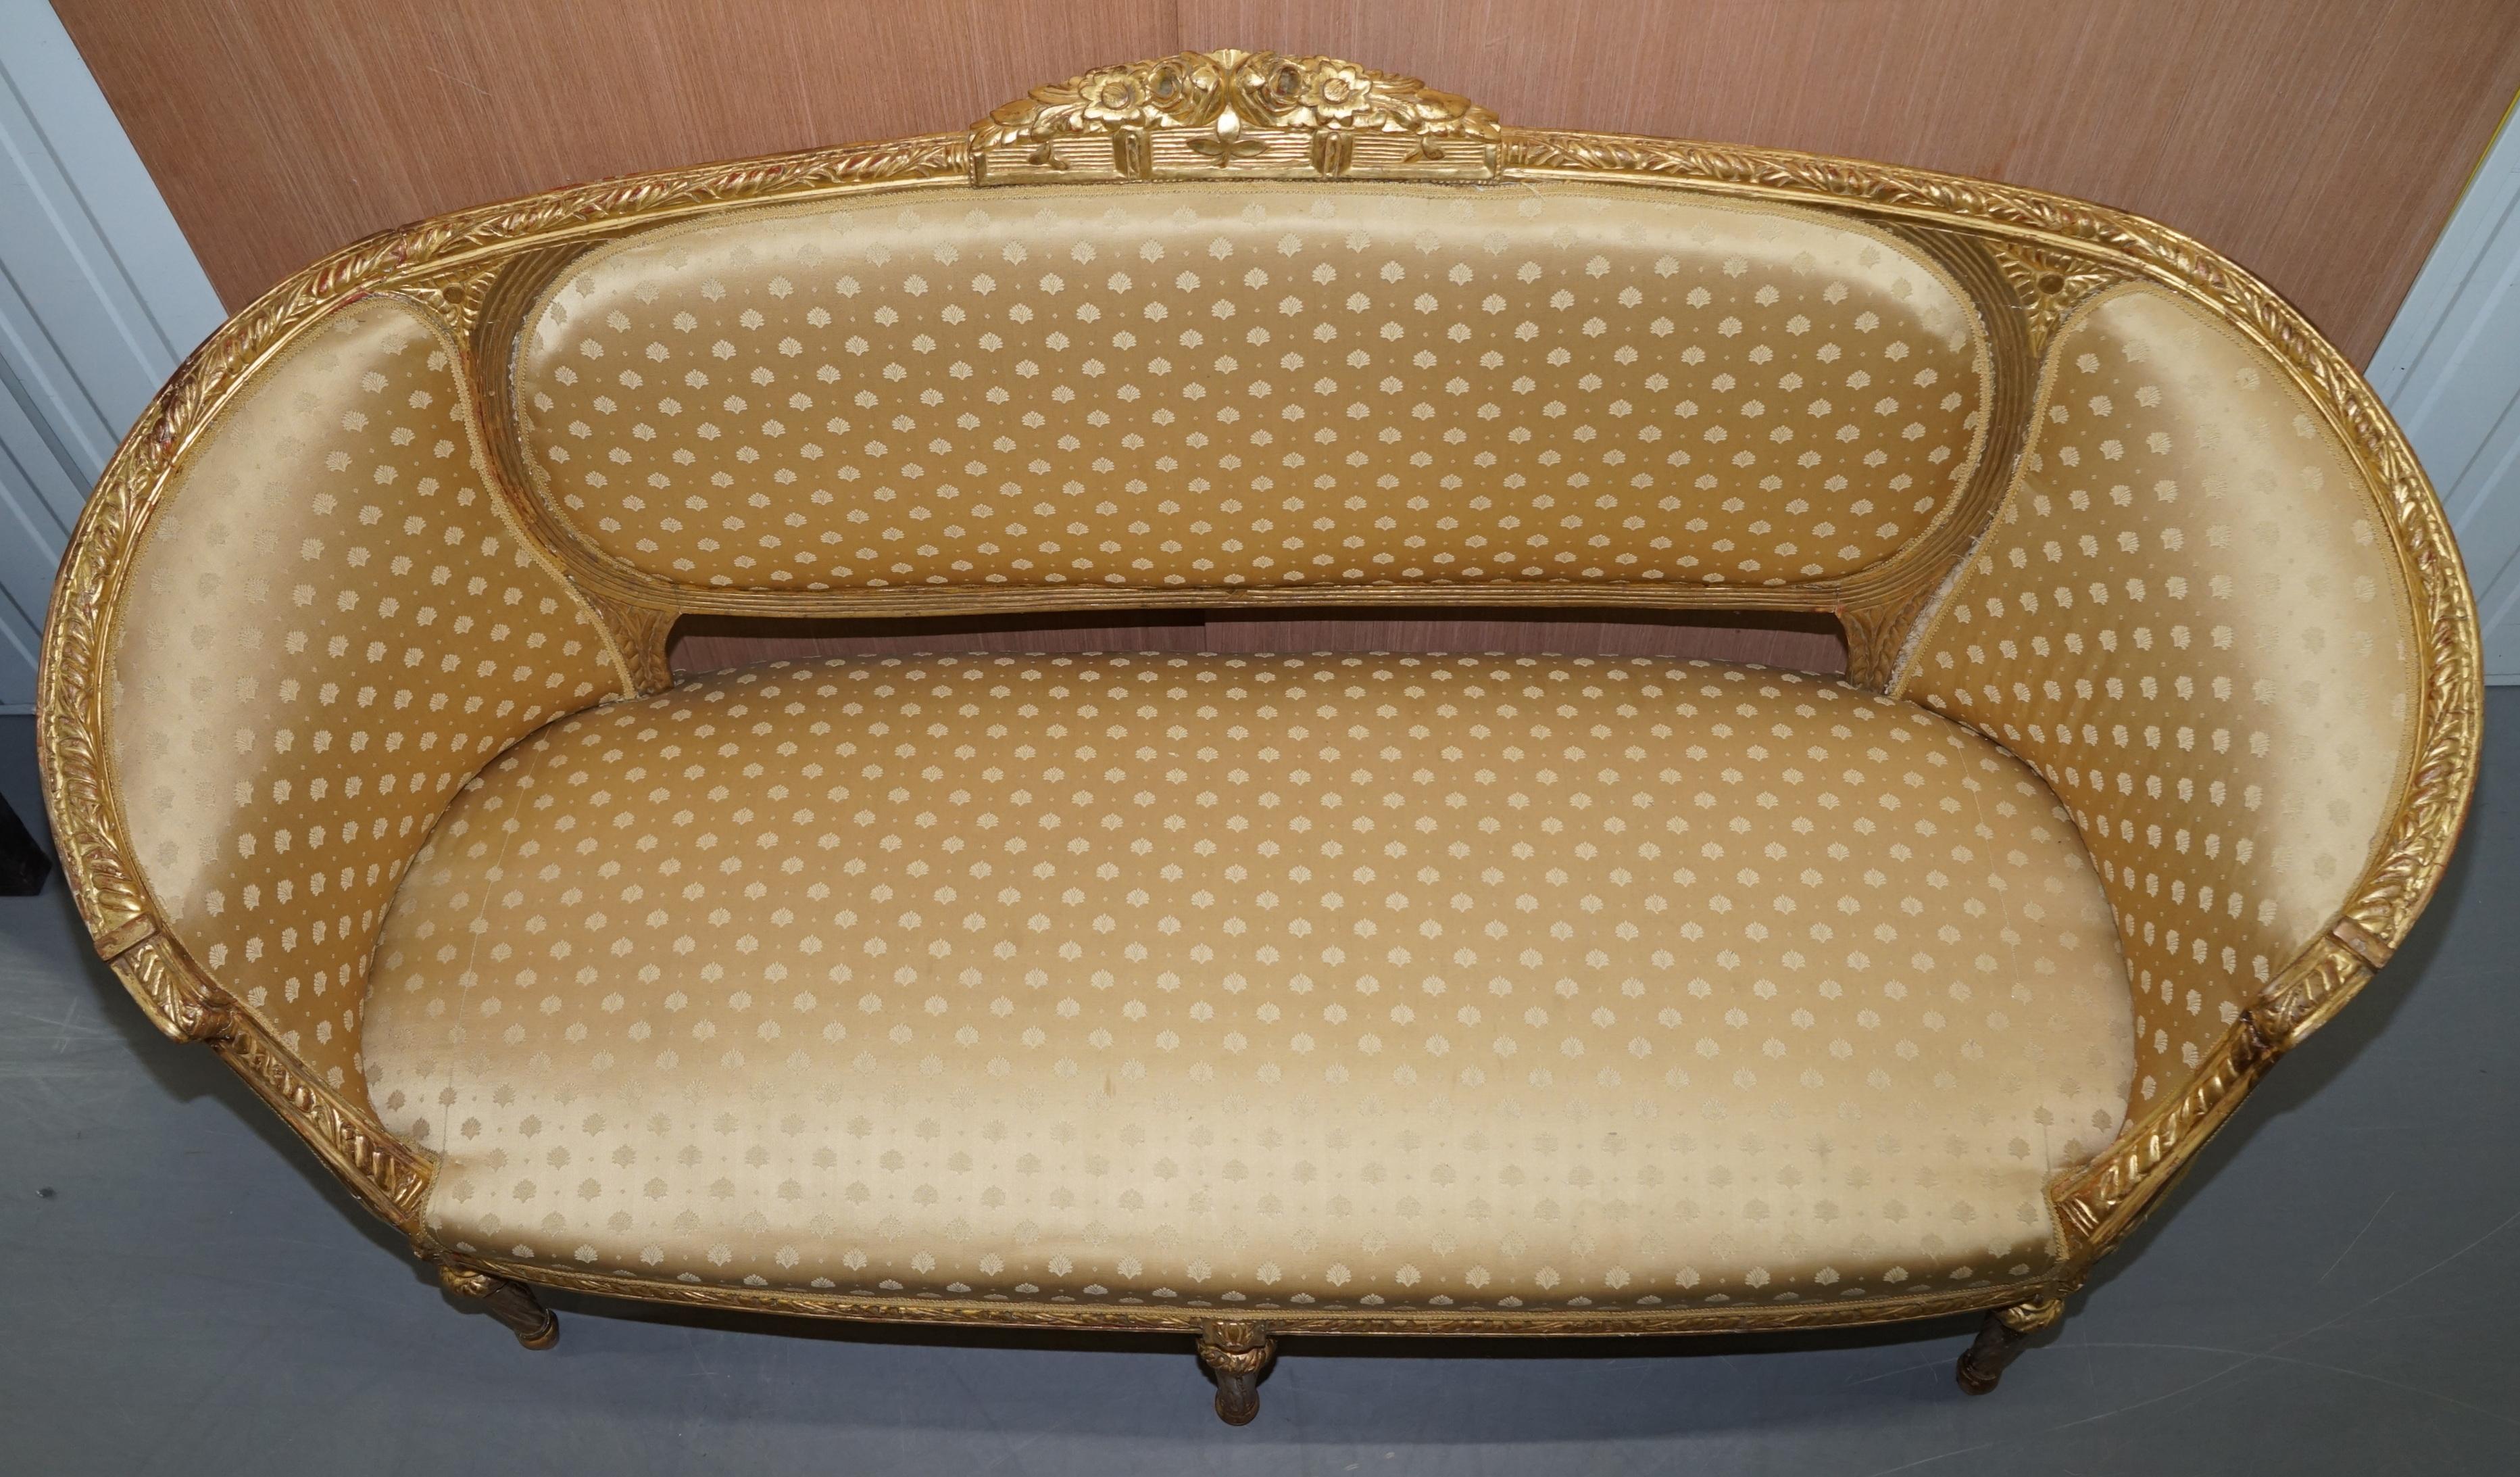 Hand-Crafted Stunning French Giltwood Napoleon III circa 1870 Salon Sofa Settee Part of Suite